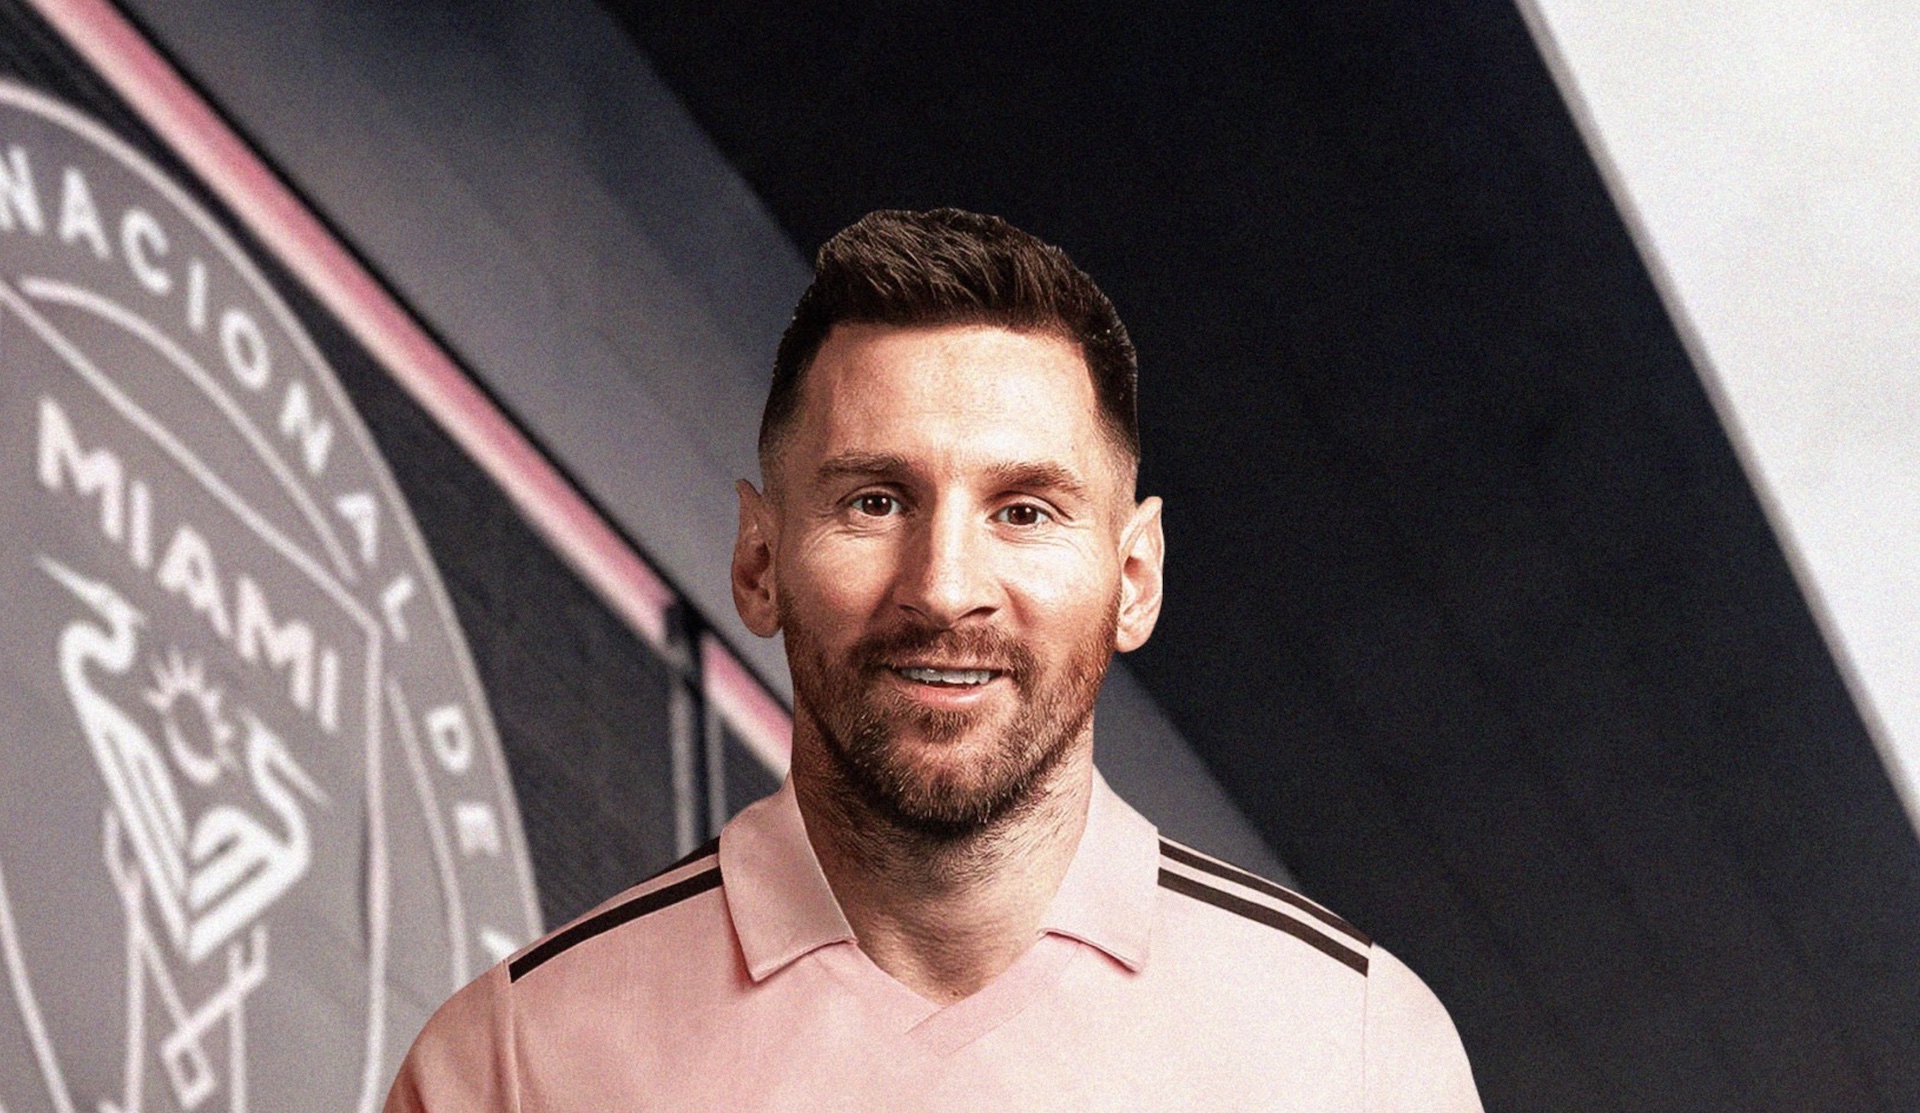 Lionel Messi, the Inter Miami midfielder, has denied rumours of a loan move away from the club